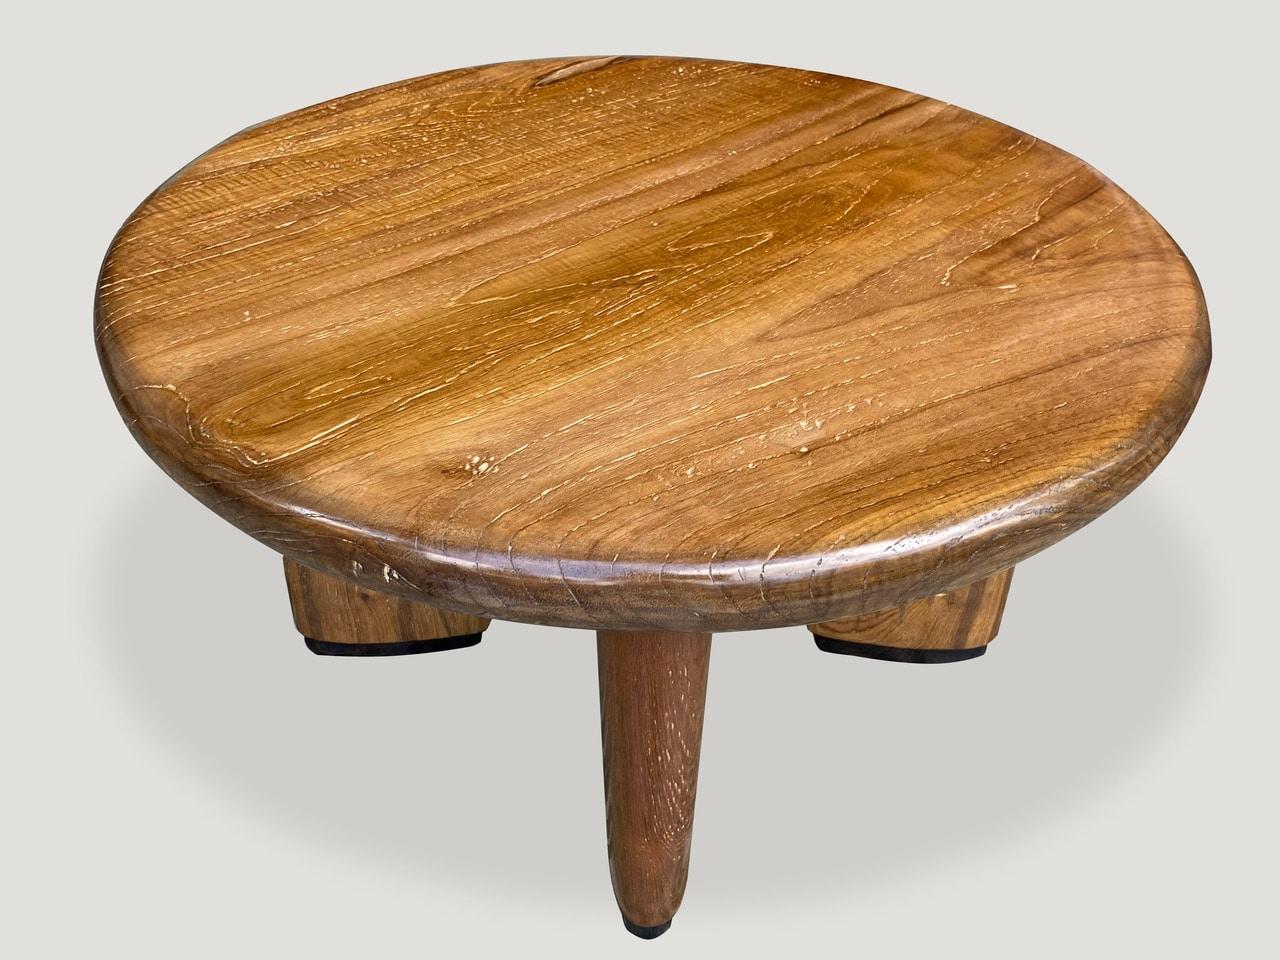 Andrianna Shamaris Midcentury Couture Teak Wood Low Profile Round Coffee Table For Sale 3